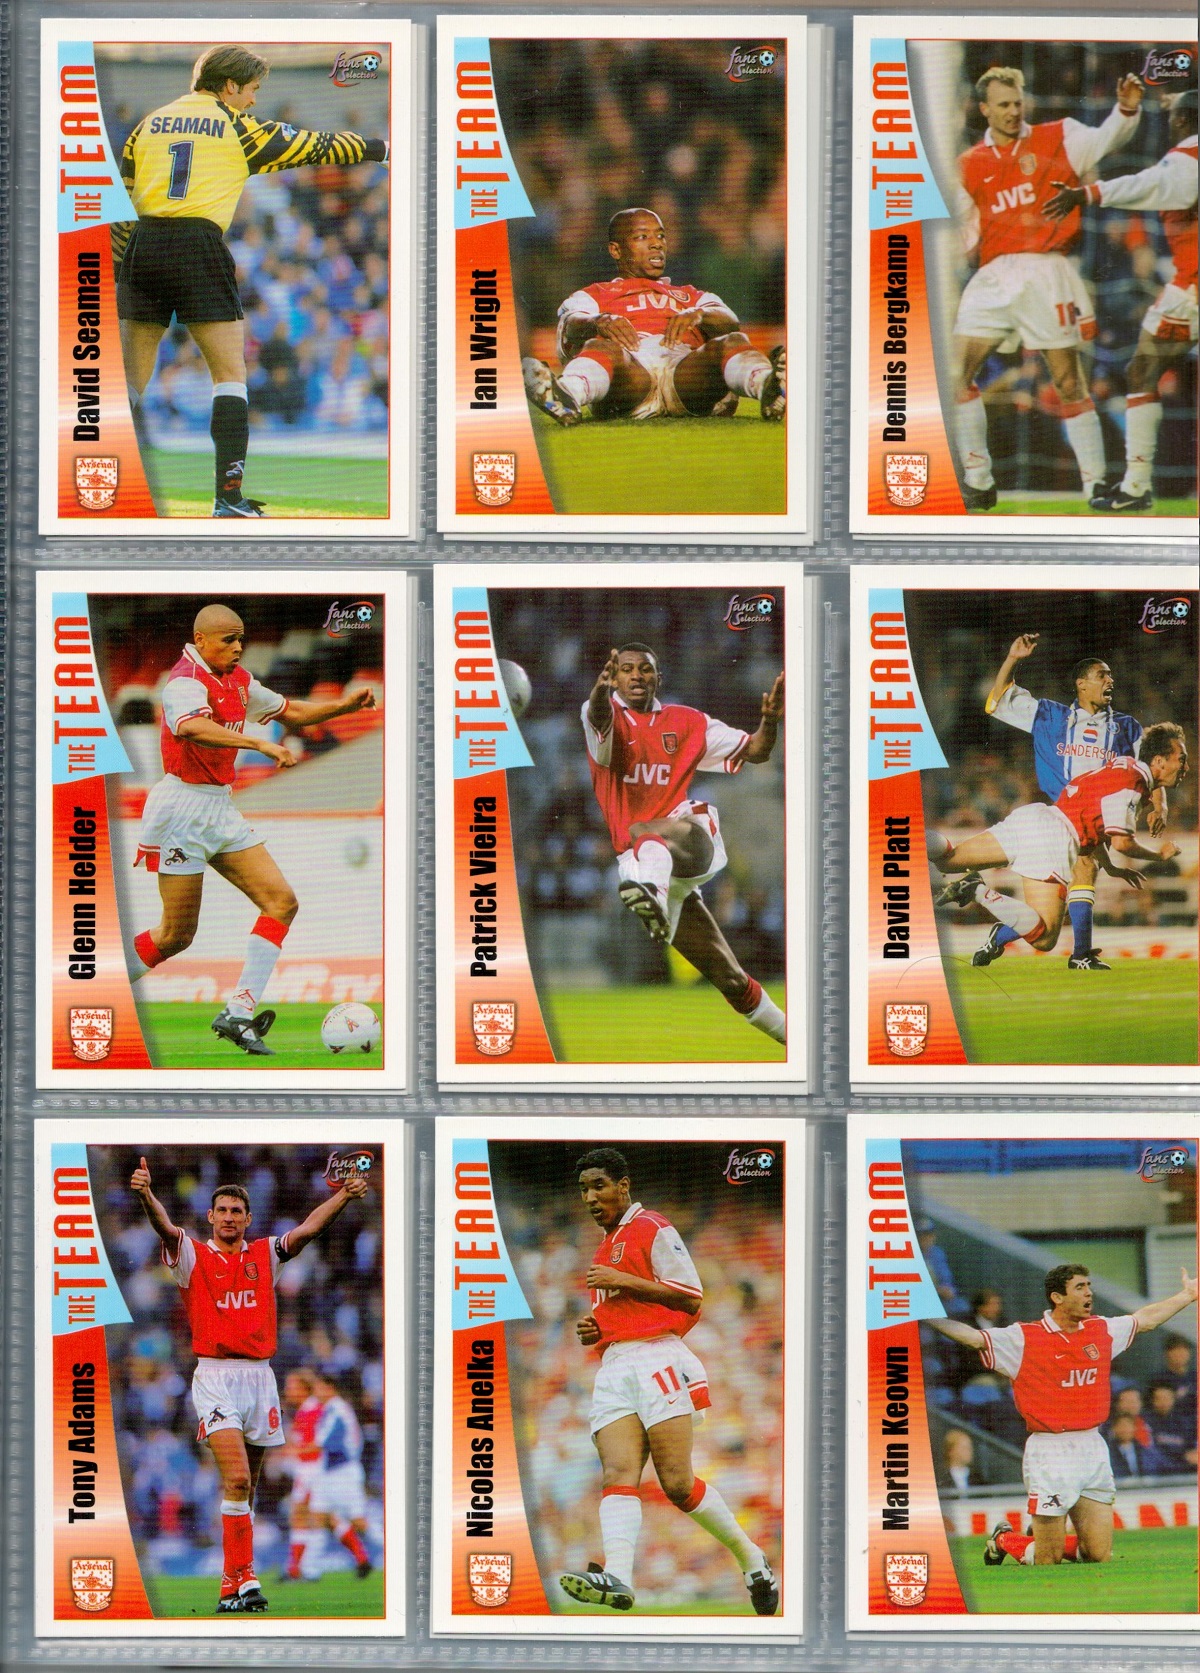 Arsenal FC Trading Card Collectors Album Complete Set from 1997/98 Season. 1-90 Complete Set. - Image 2 of 5